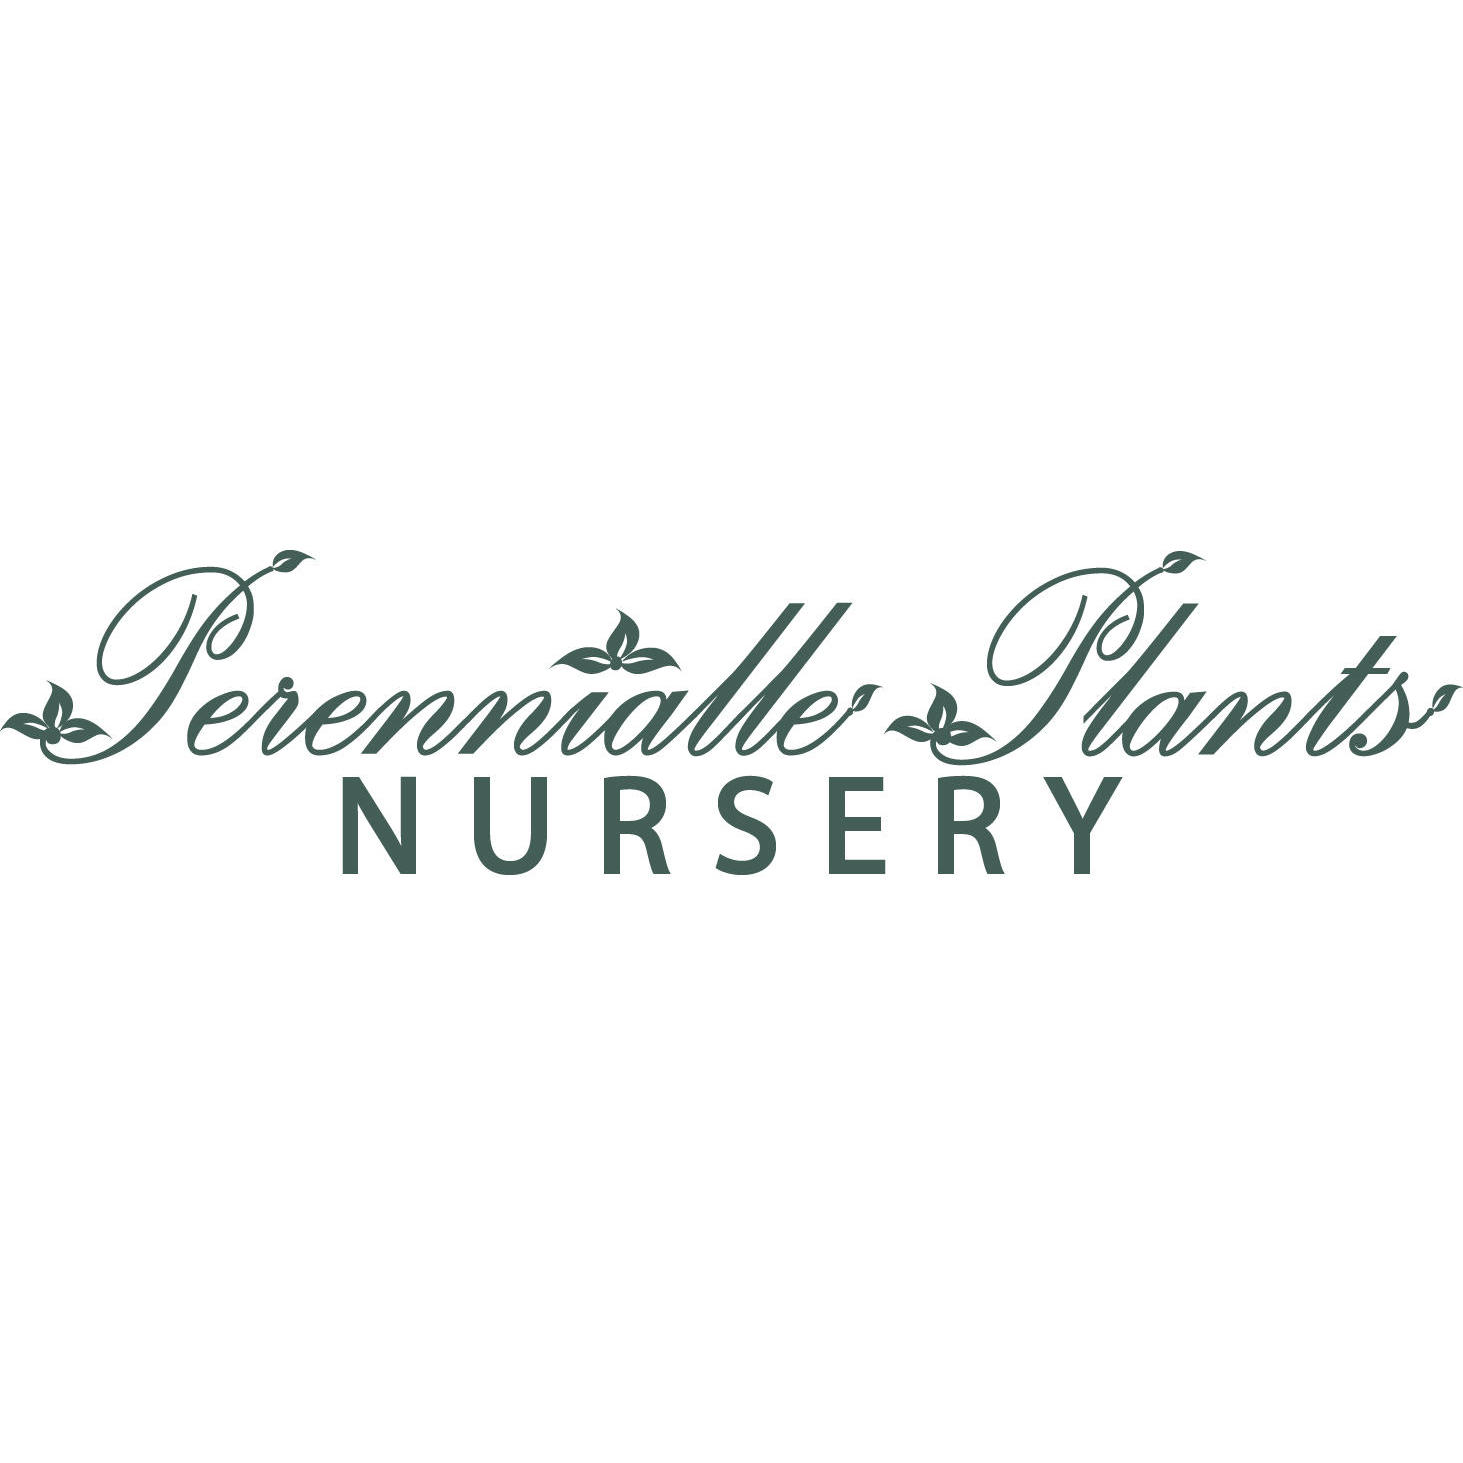 Perennialle Plants Nursery, Cafe and Emporium - Canowindra, NSW 2804 - 0427 077 798 | ShowMeLocal.com